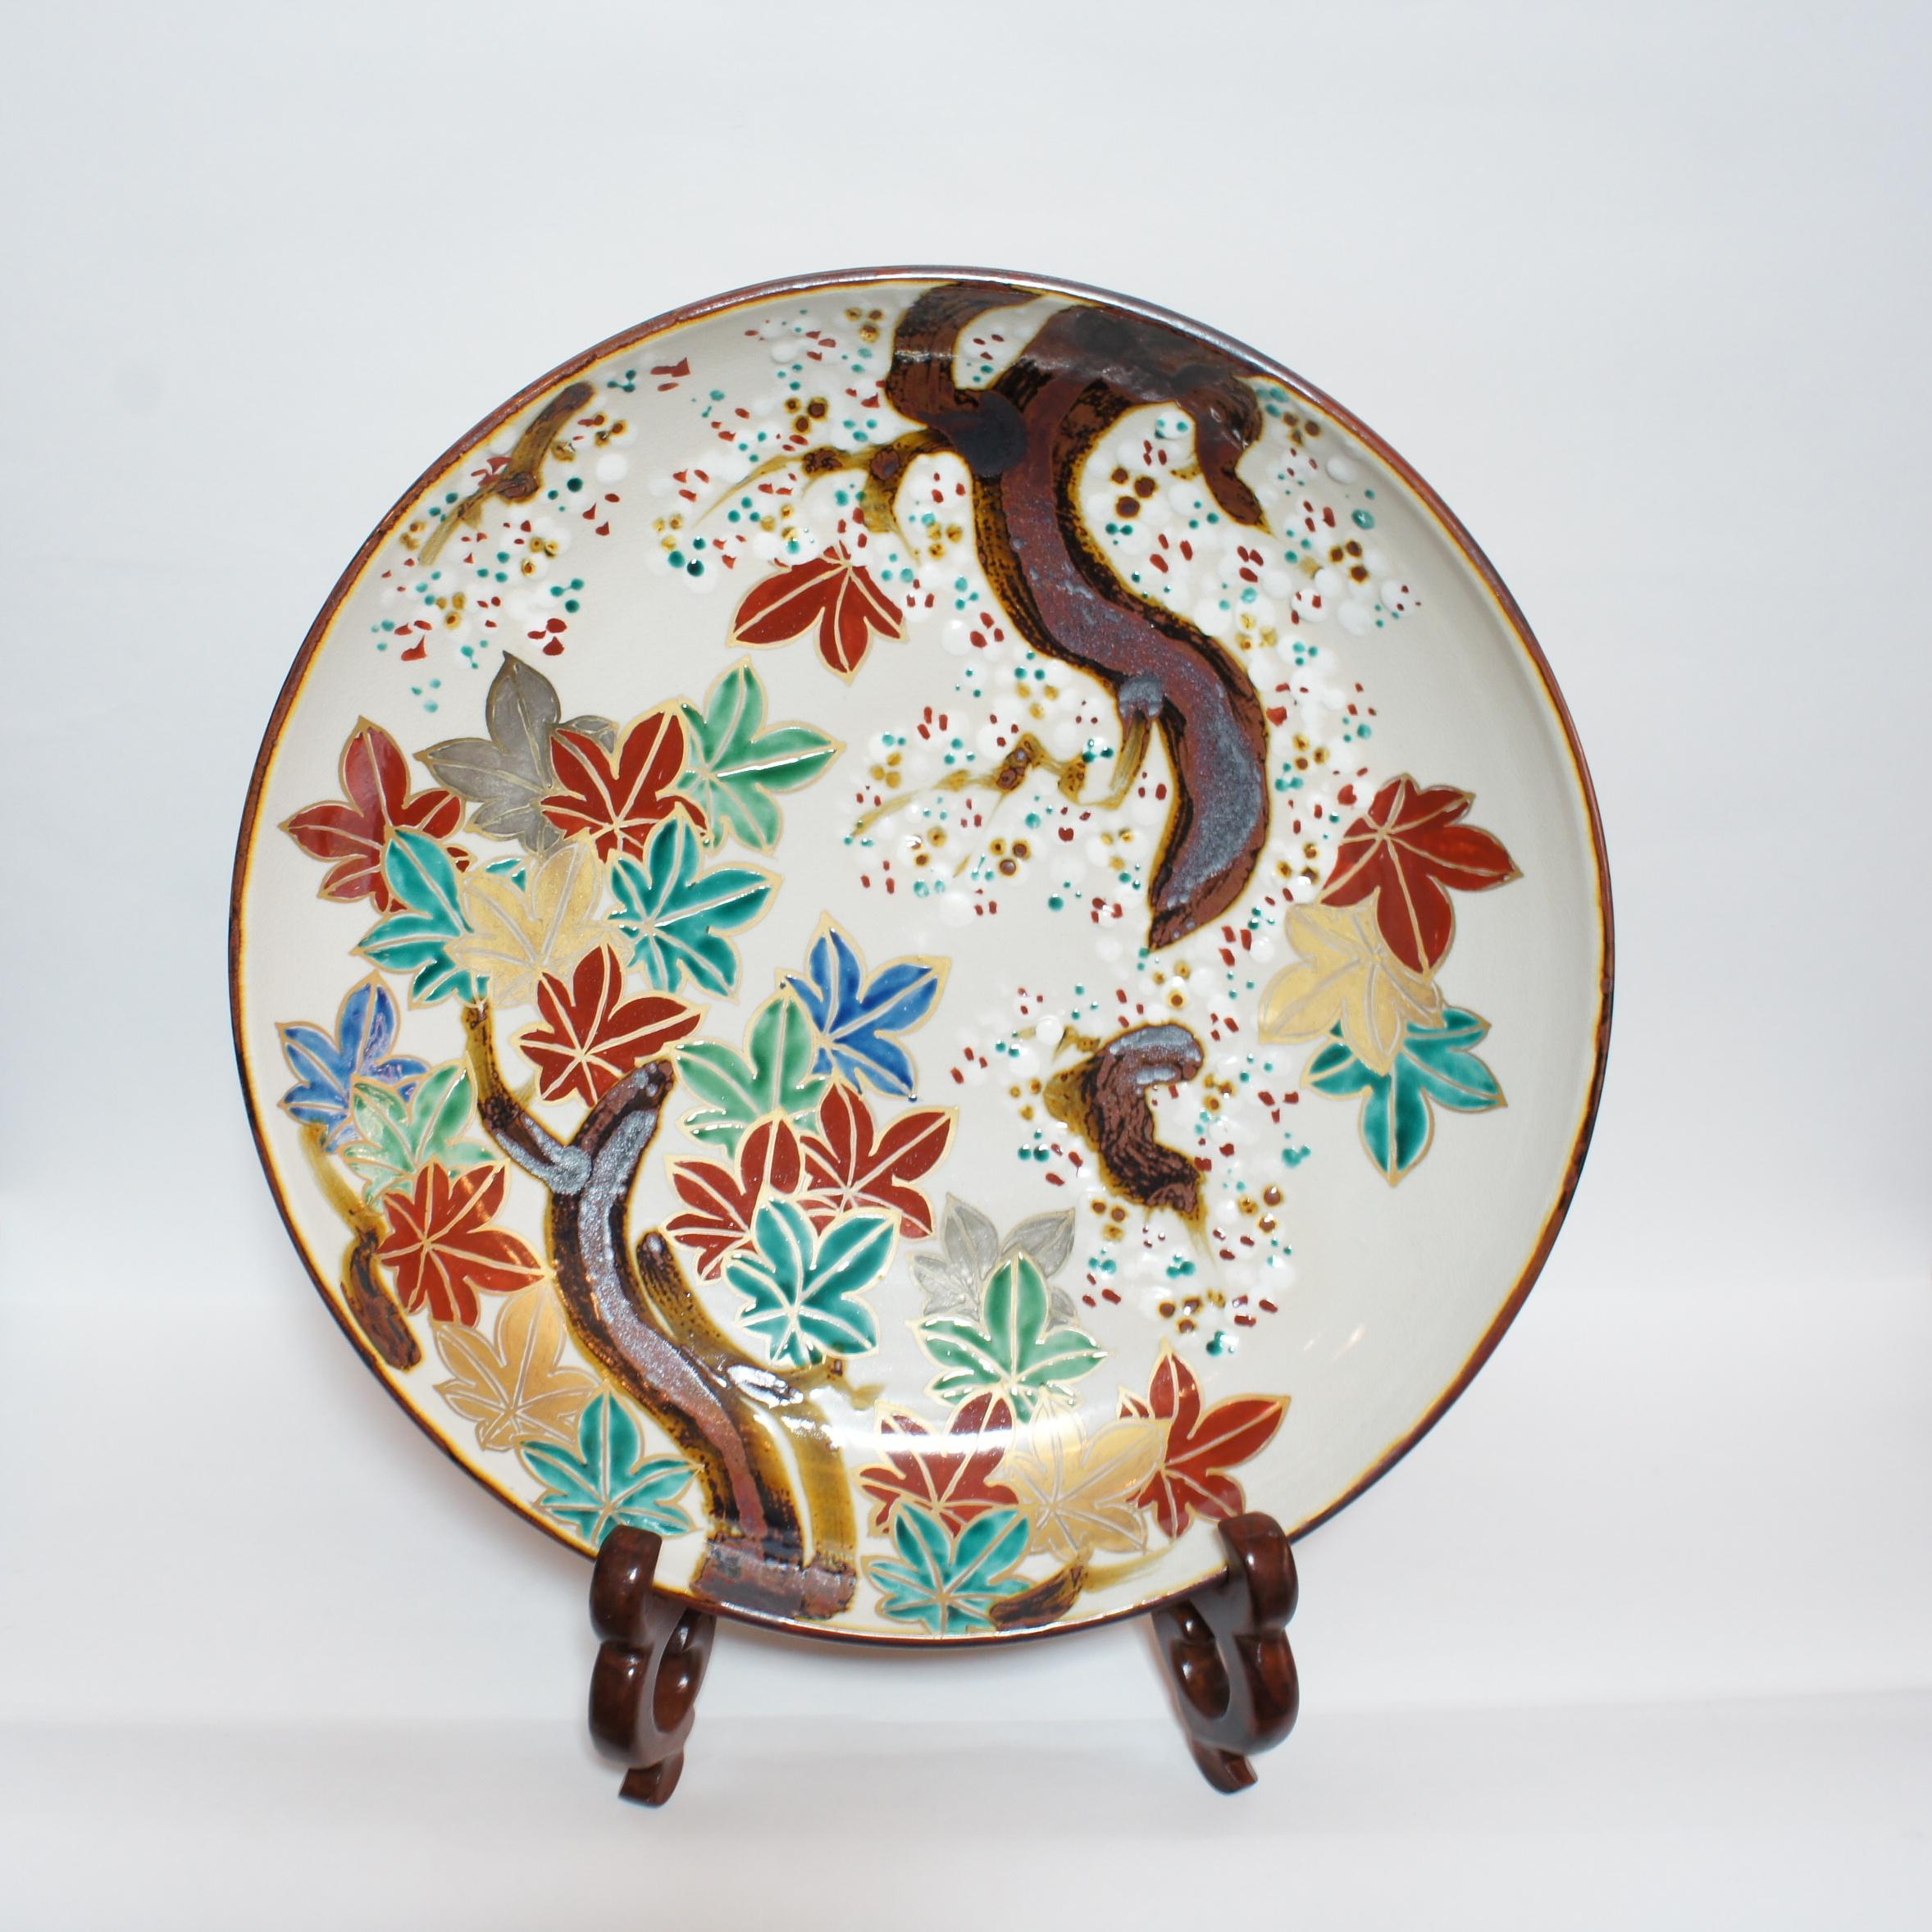 This plate was made with porcelain, style of Inuyama-yaki and made around 1960s. The dimensions are 36×36×H8 cm. 
A boldly drawn pattern of autumn leaves and cherry blossoms, two patterns emblematic of Inuyama Ware are highlighted on this delicate